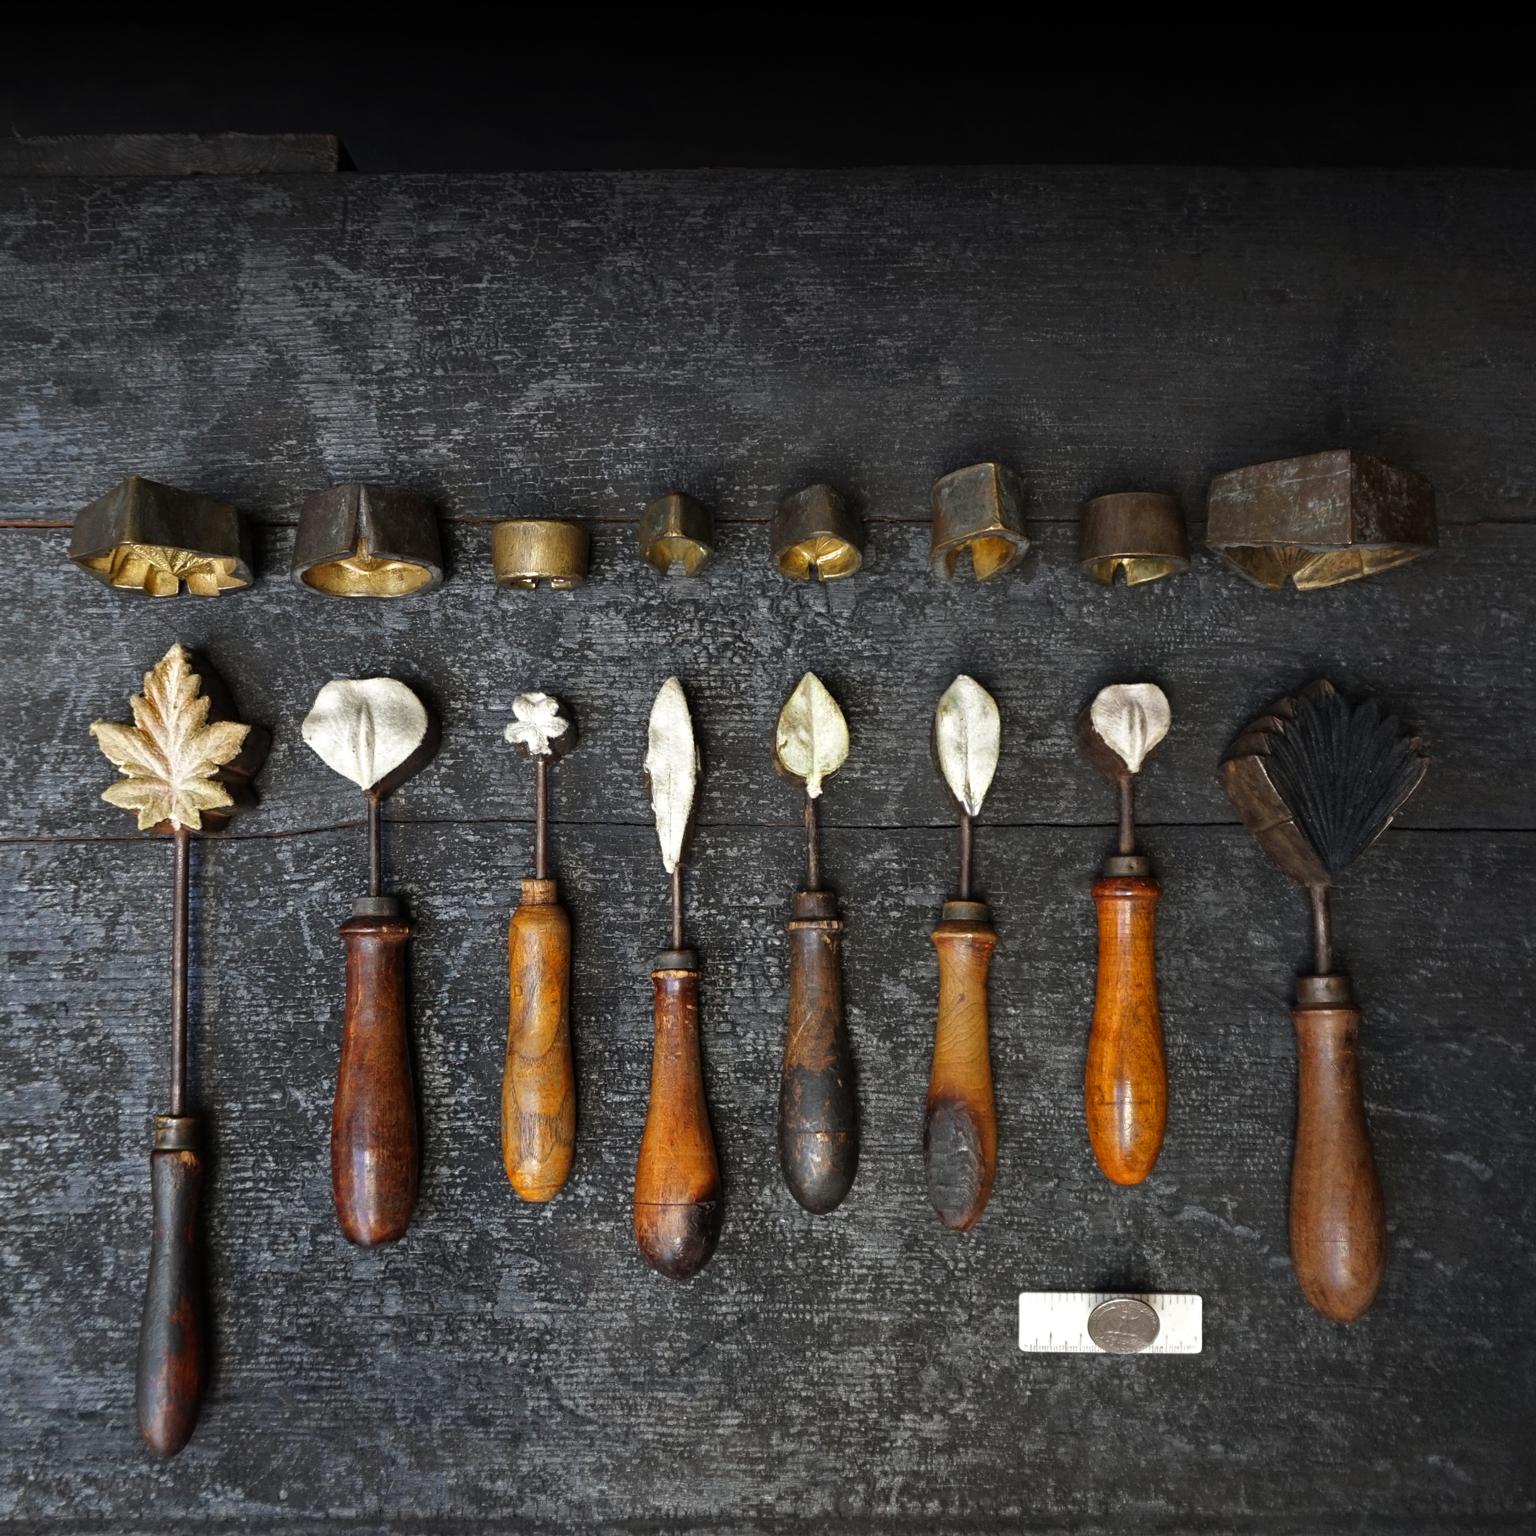 This is a very decorative set of tools from 19th century hat makers. The irons were heated and used to press felt or other fabric in the shape of leaves and flowers to create corsages or decorations on ladies hats. This set is complete with negative